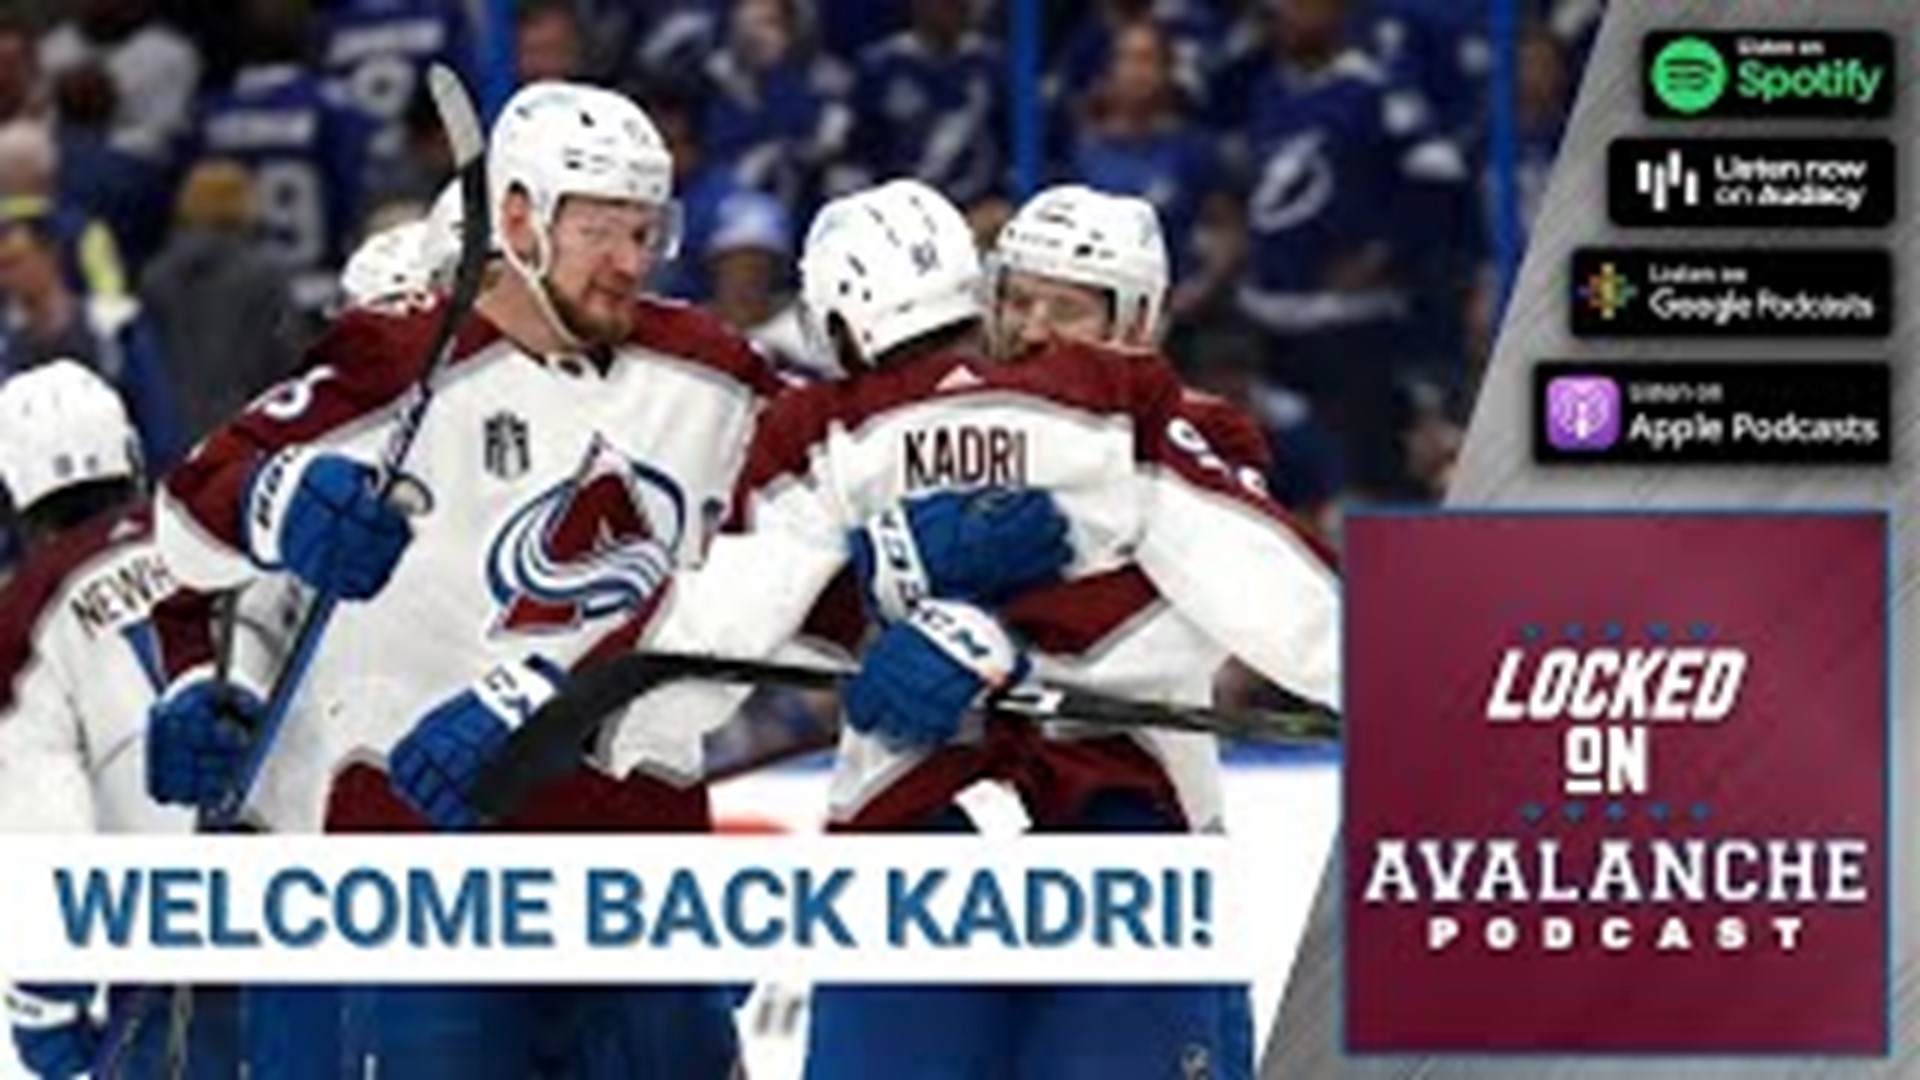 A classic of a game that saw both the Colorado Avalanche and Tampa Bay Lightning going back and forth, headed into overtime for the second time this series.